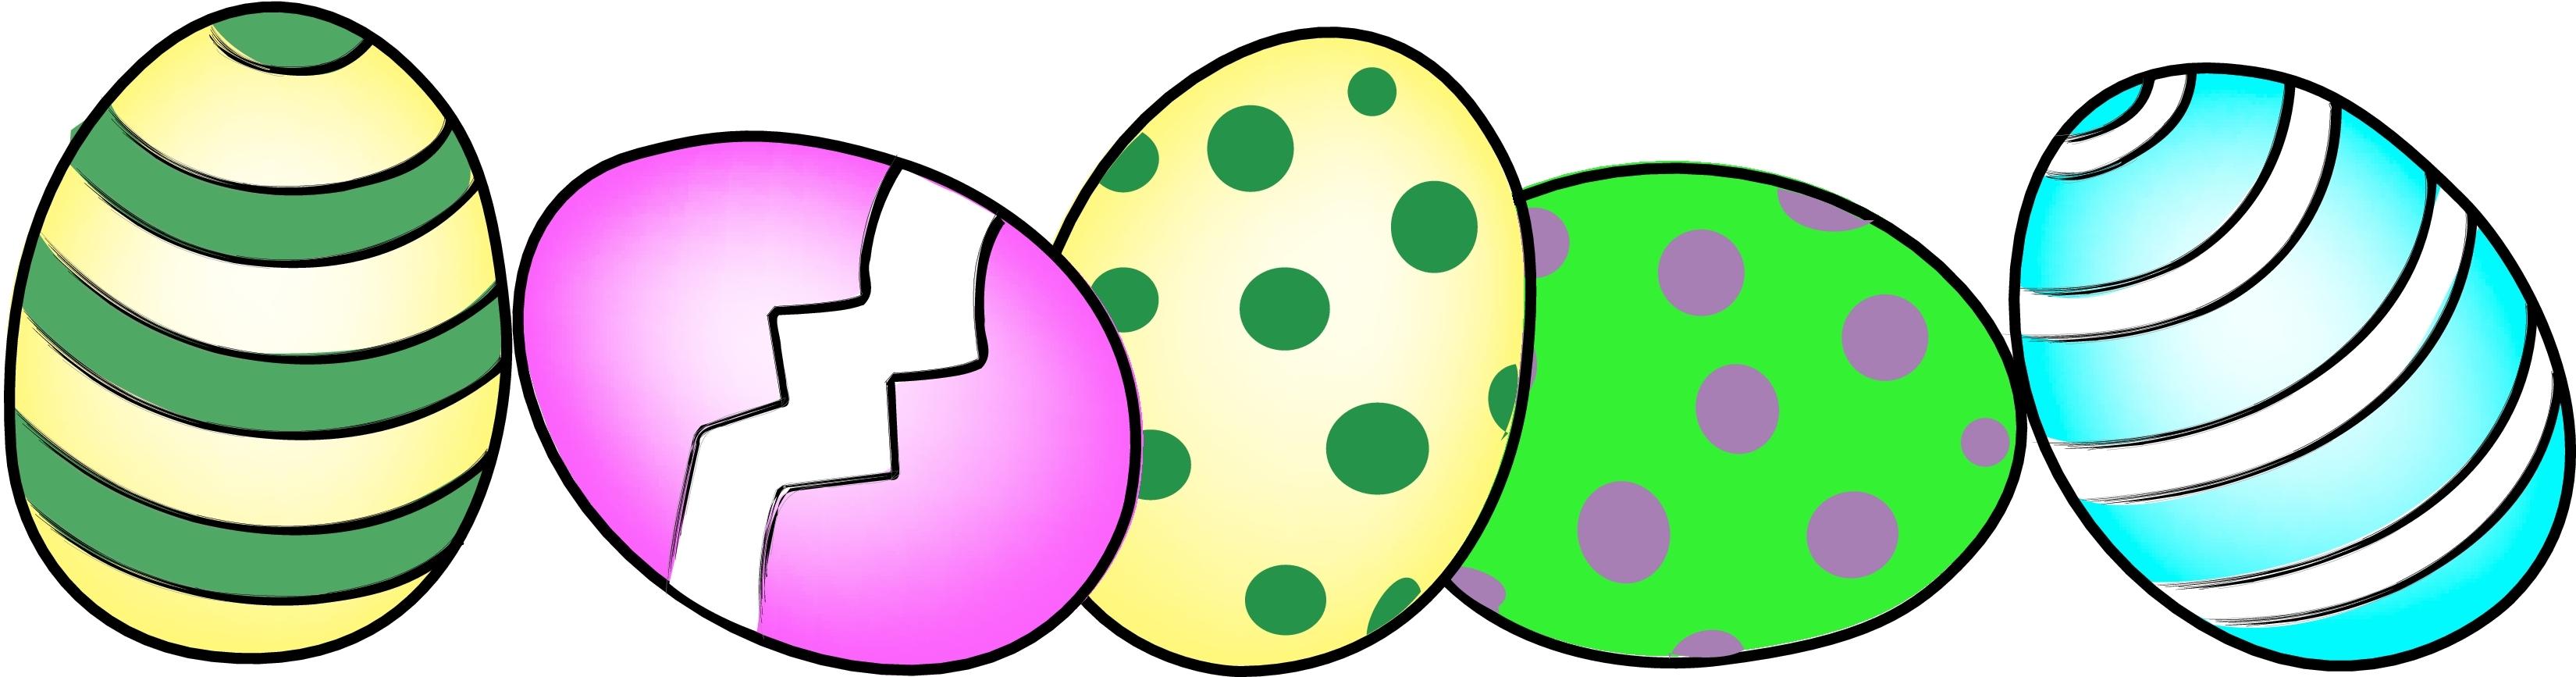 Clipart easter. Happy images pics photos